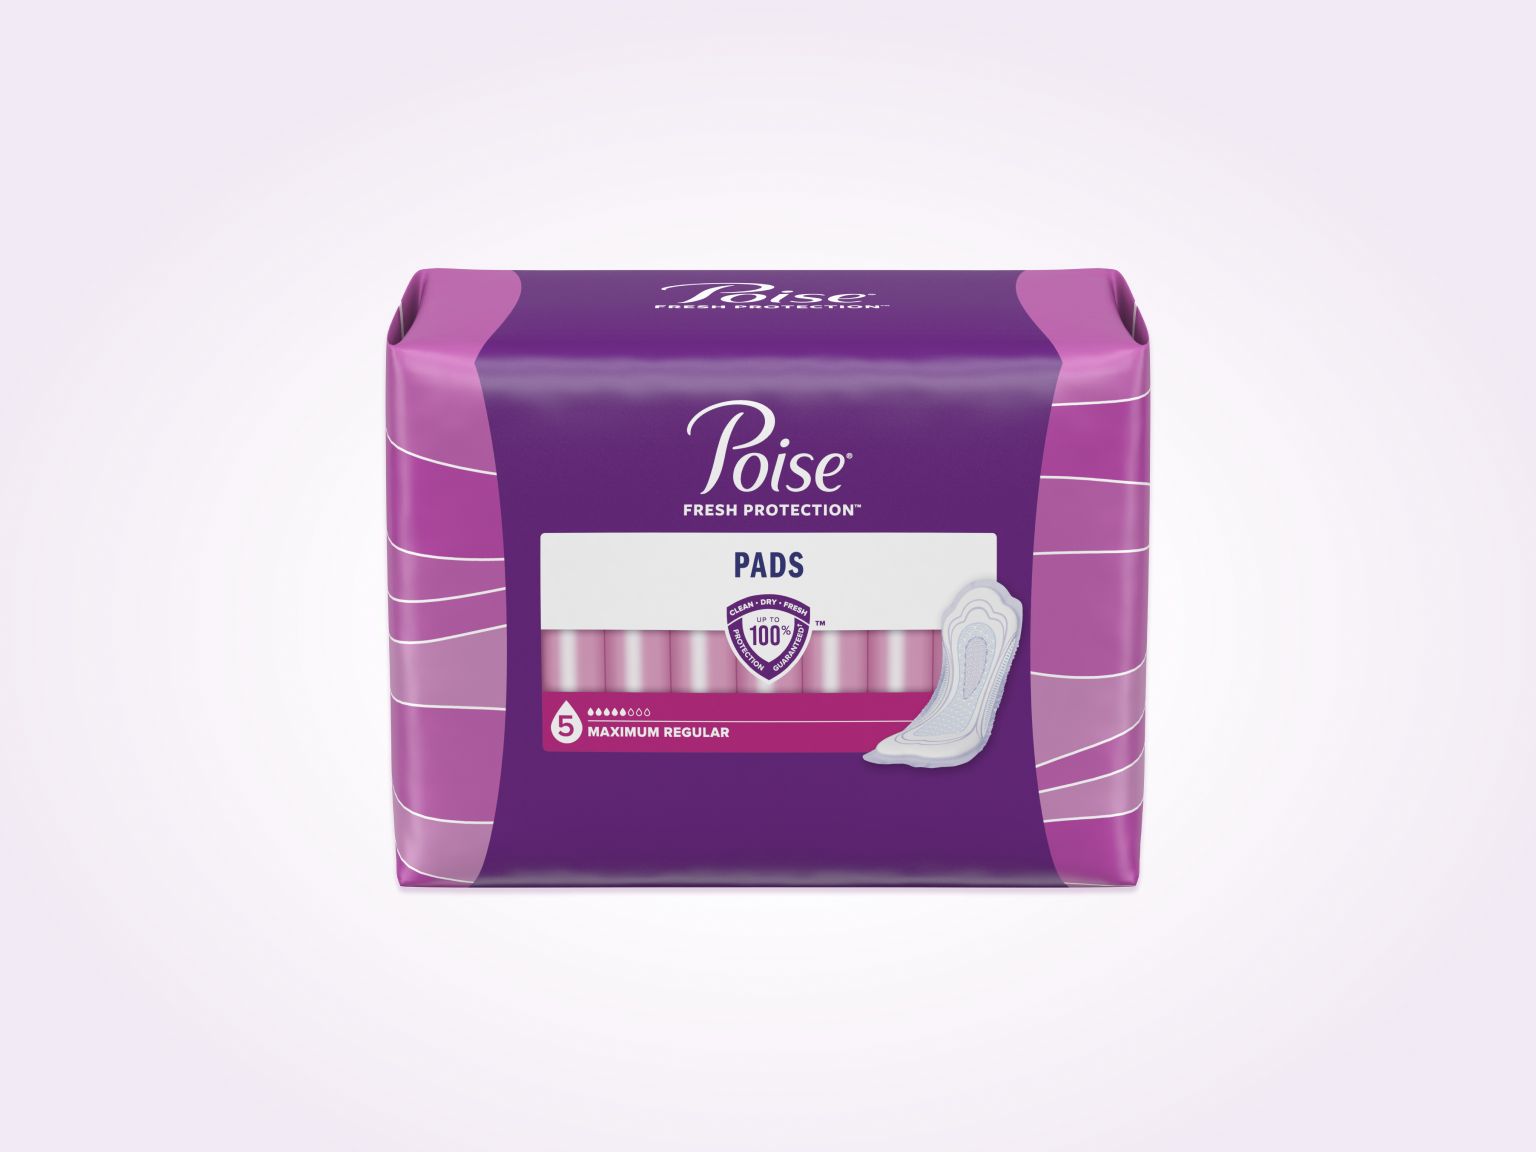 Poise Ultra Thin Incontinence Pads for Women, 6 Drop, Ultimate Absorbency,  Long, 26Ct, PSE UT U 26